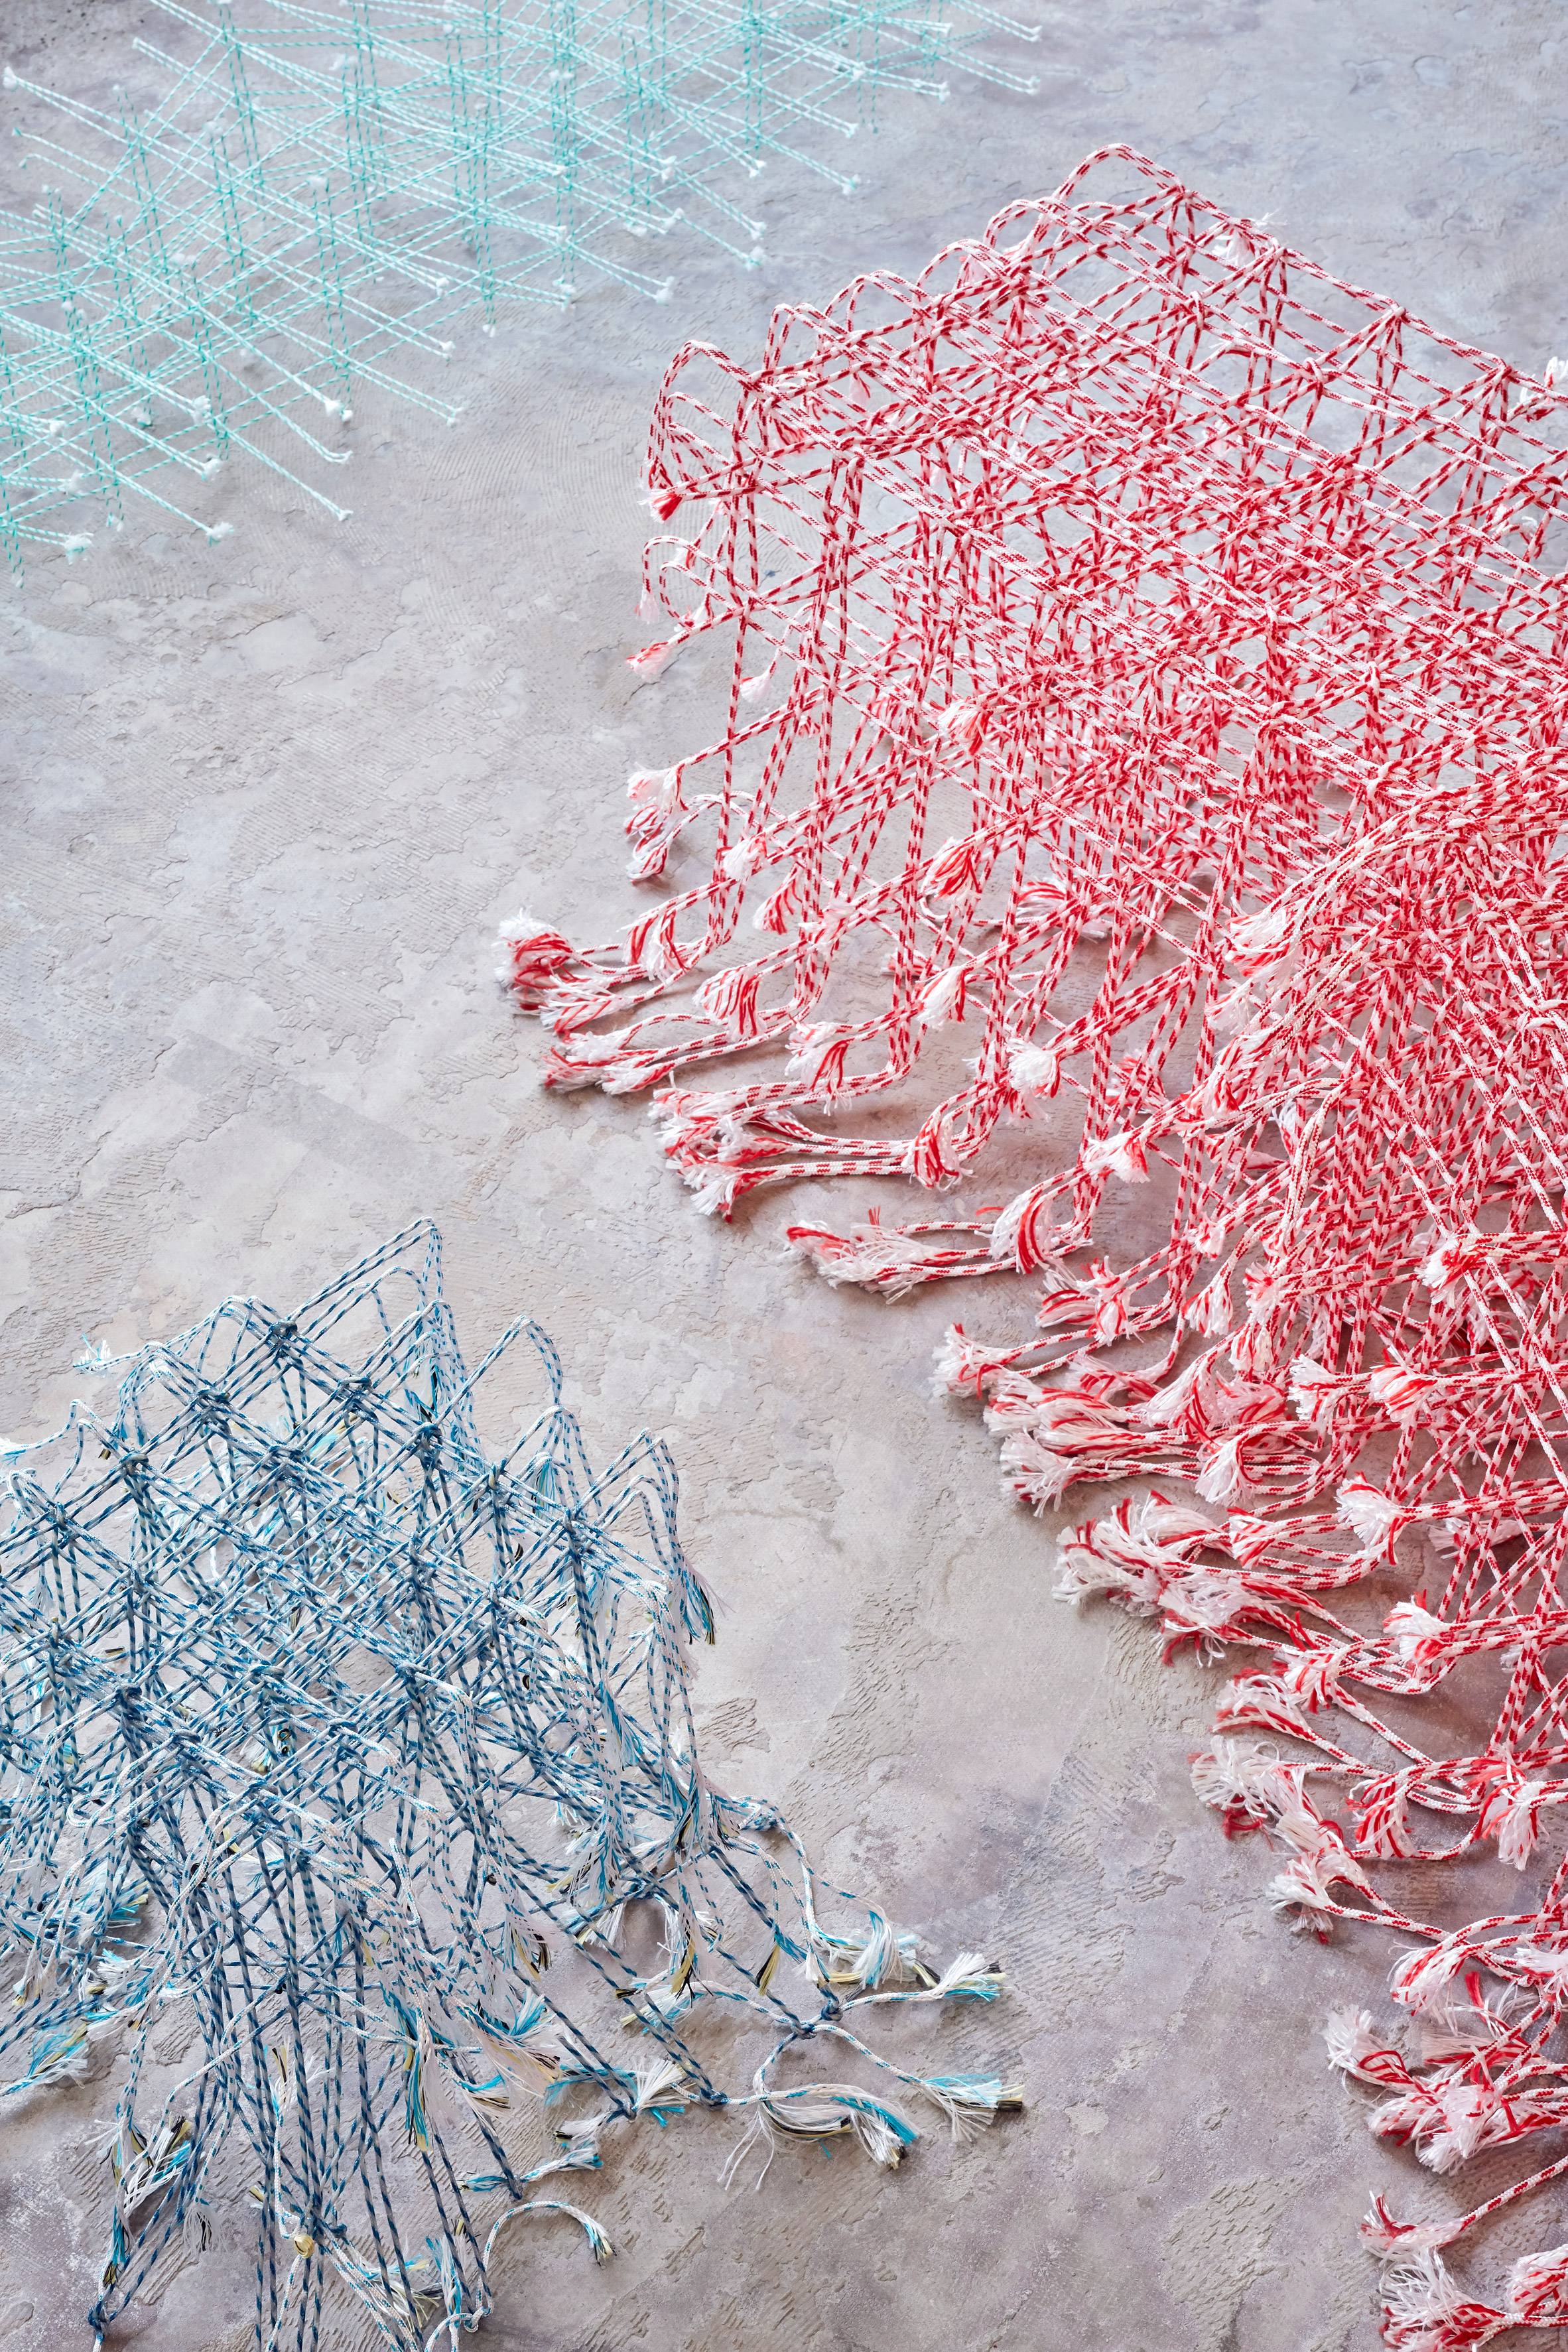 Fransje Gimbrere creates textile sculptures from natural fibres and recycled plastic